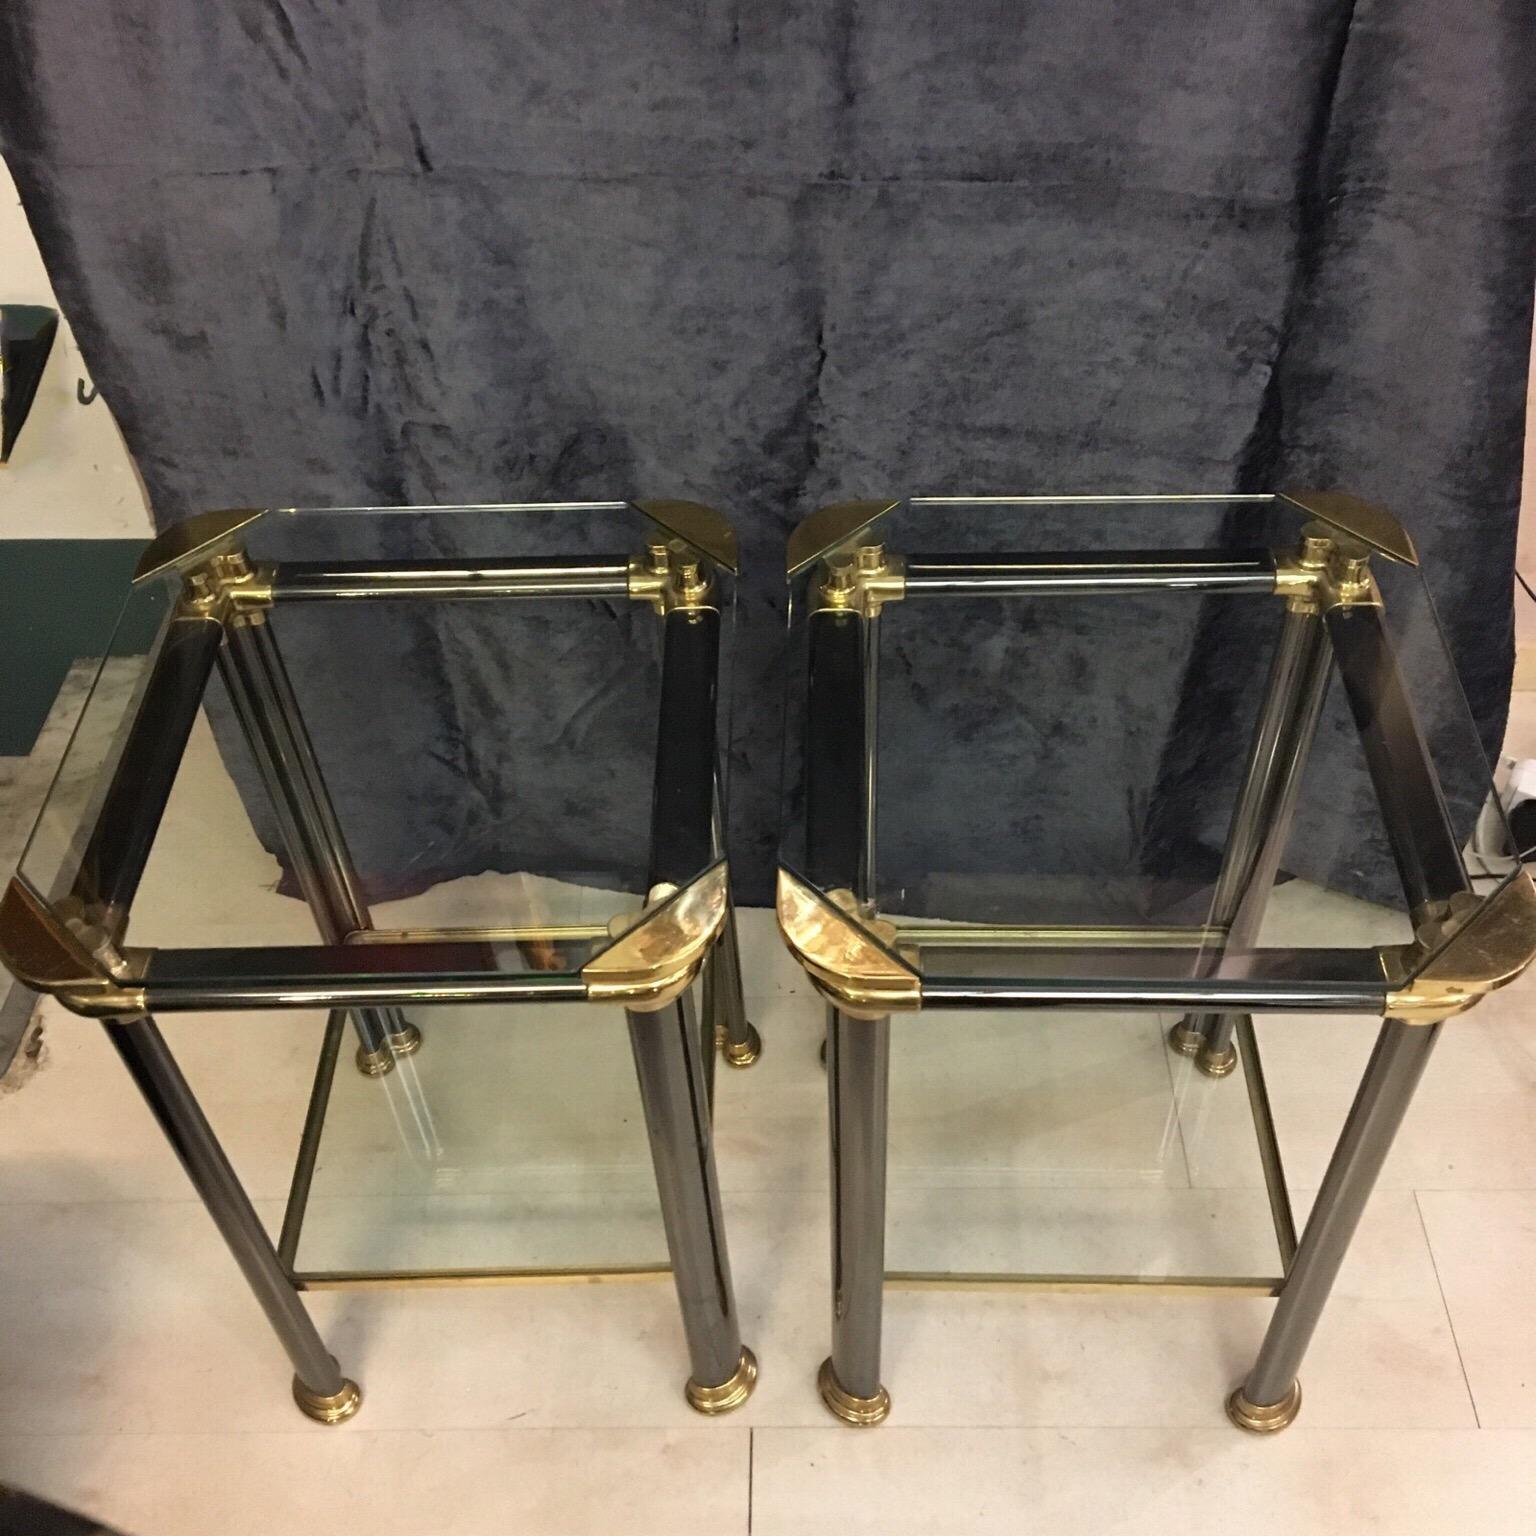 Pair of Italian design side tables with anthracite metal and brass structure, two crystal shelves, signed by Mara, Italy. They are heavy and solid in perfect vintage condition. Please note that the brass is original of the period and thus shows